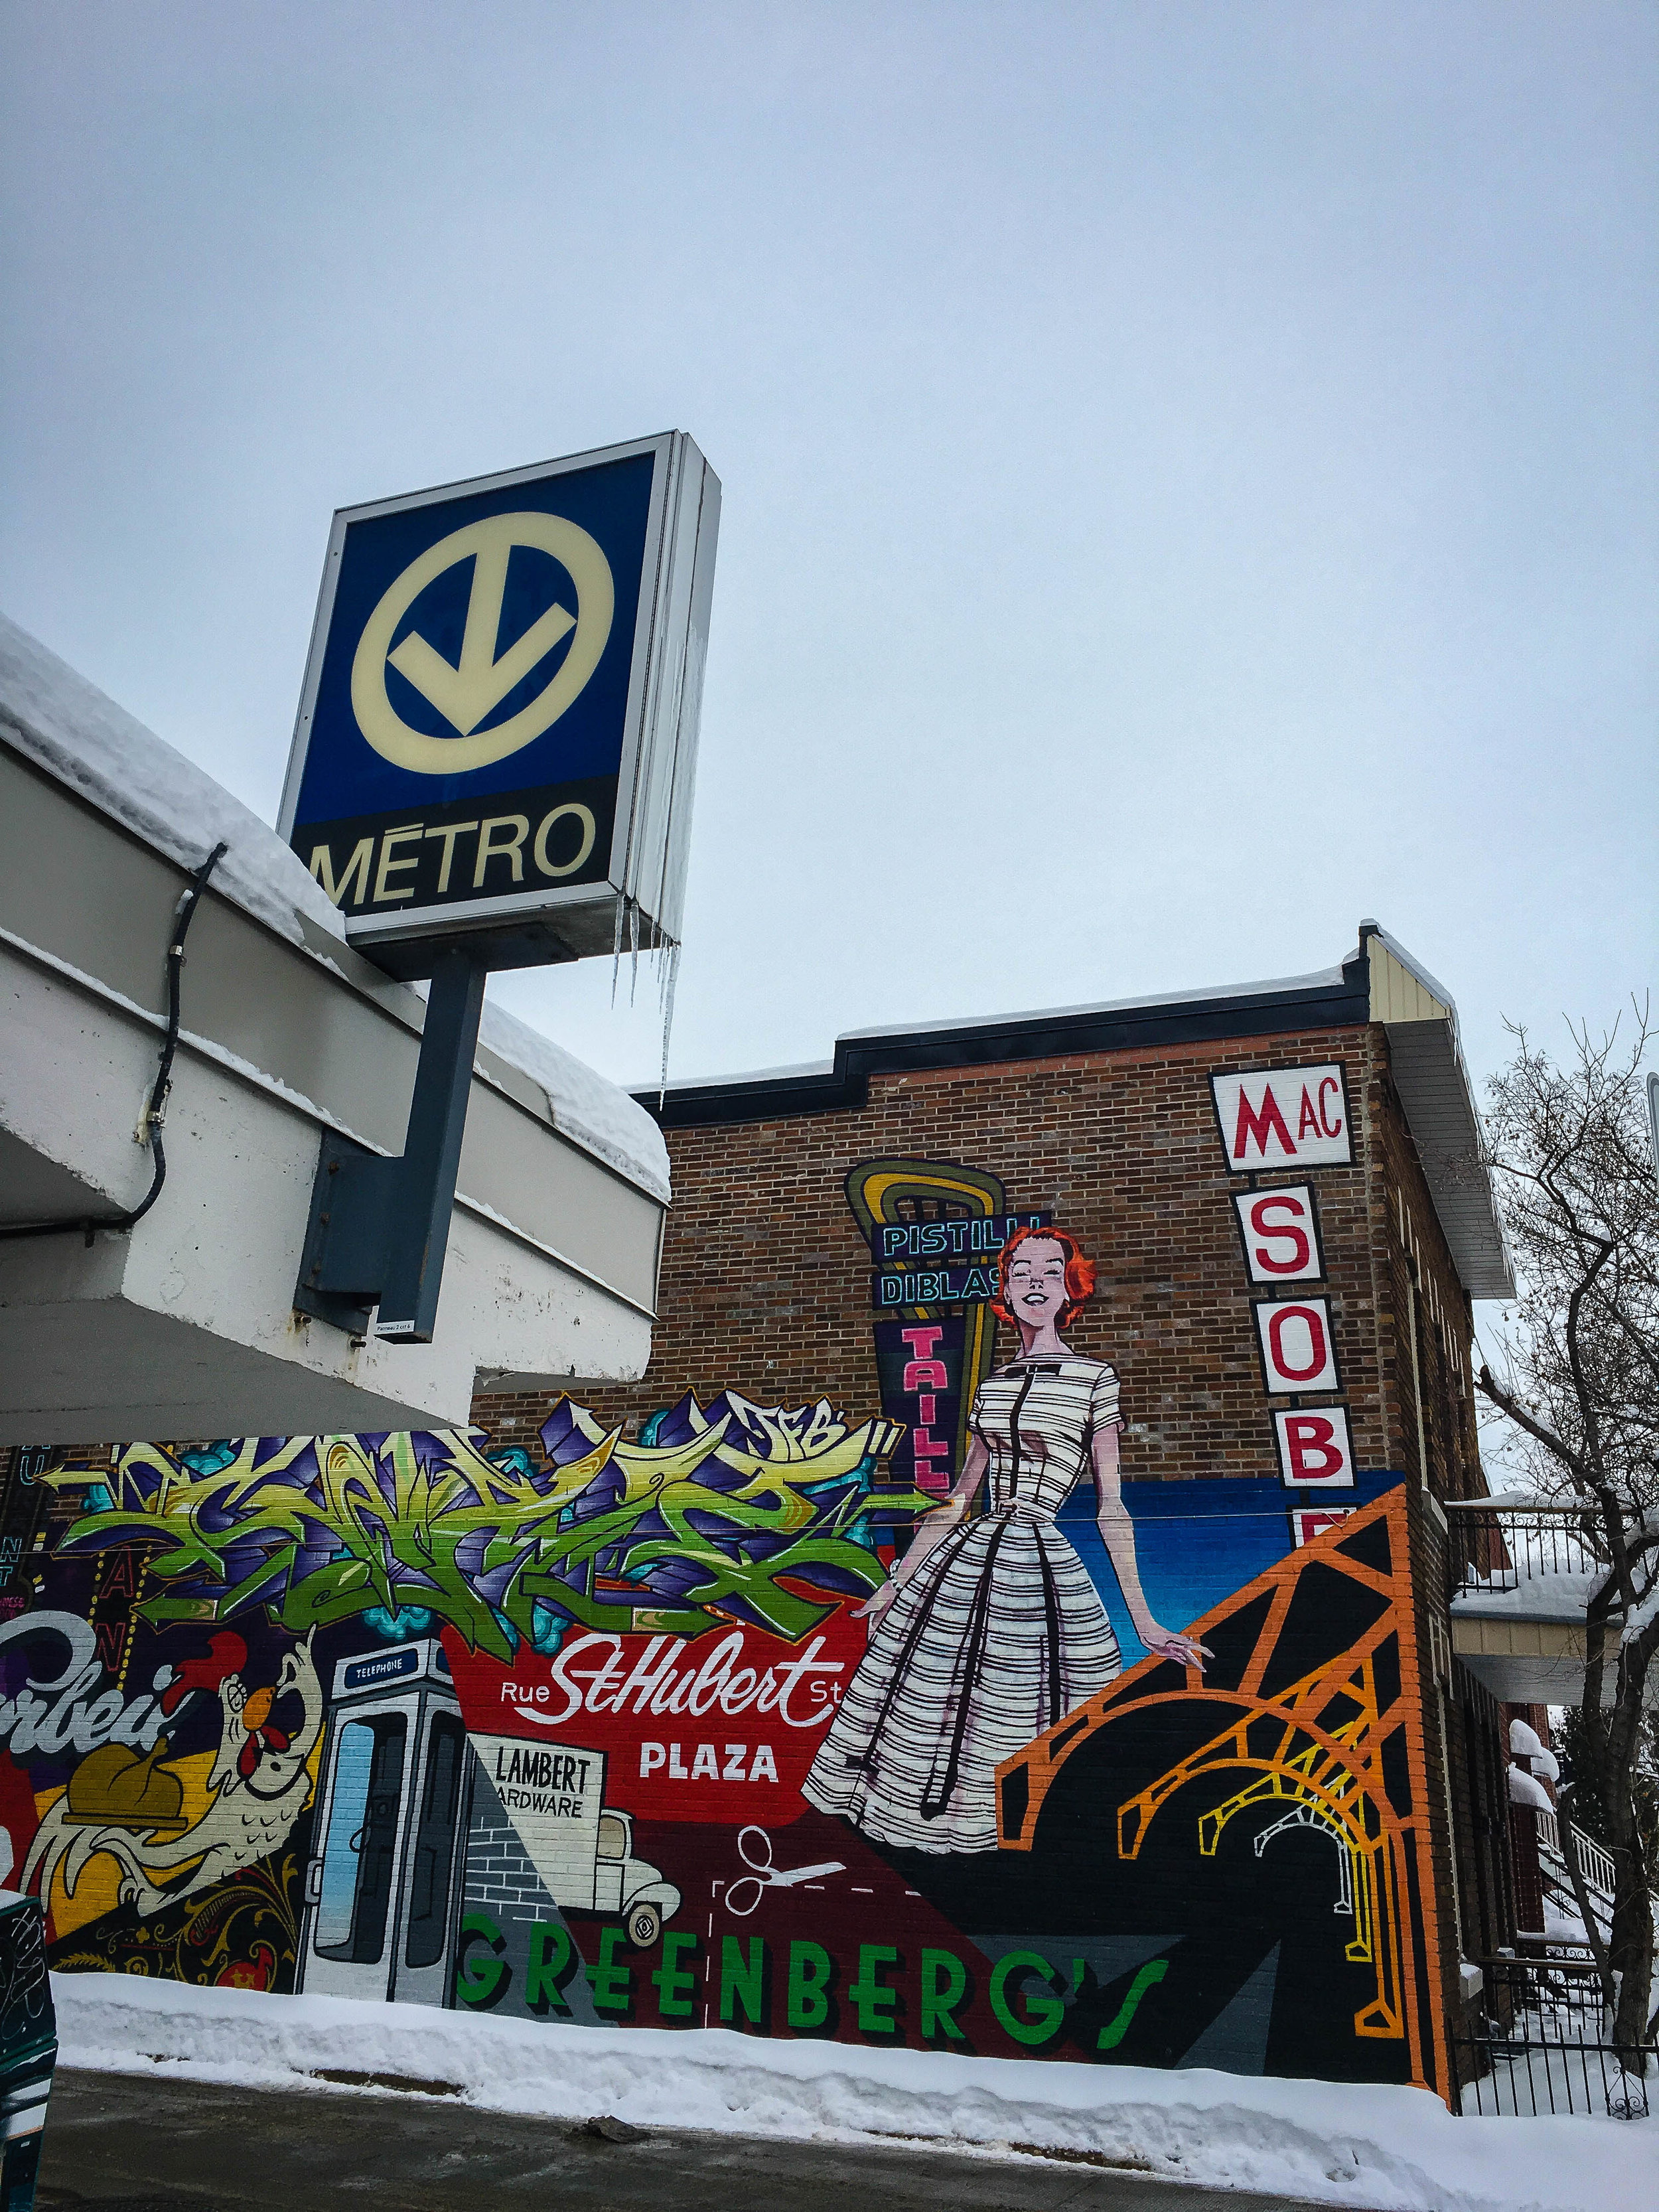 Montreal street art -Mural at the exit of the Beaubien Metro with retro and vintage elements. Graffiti proposed as the best street art in Montreal